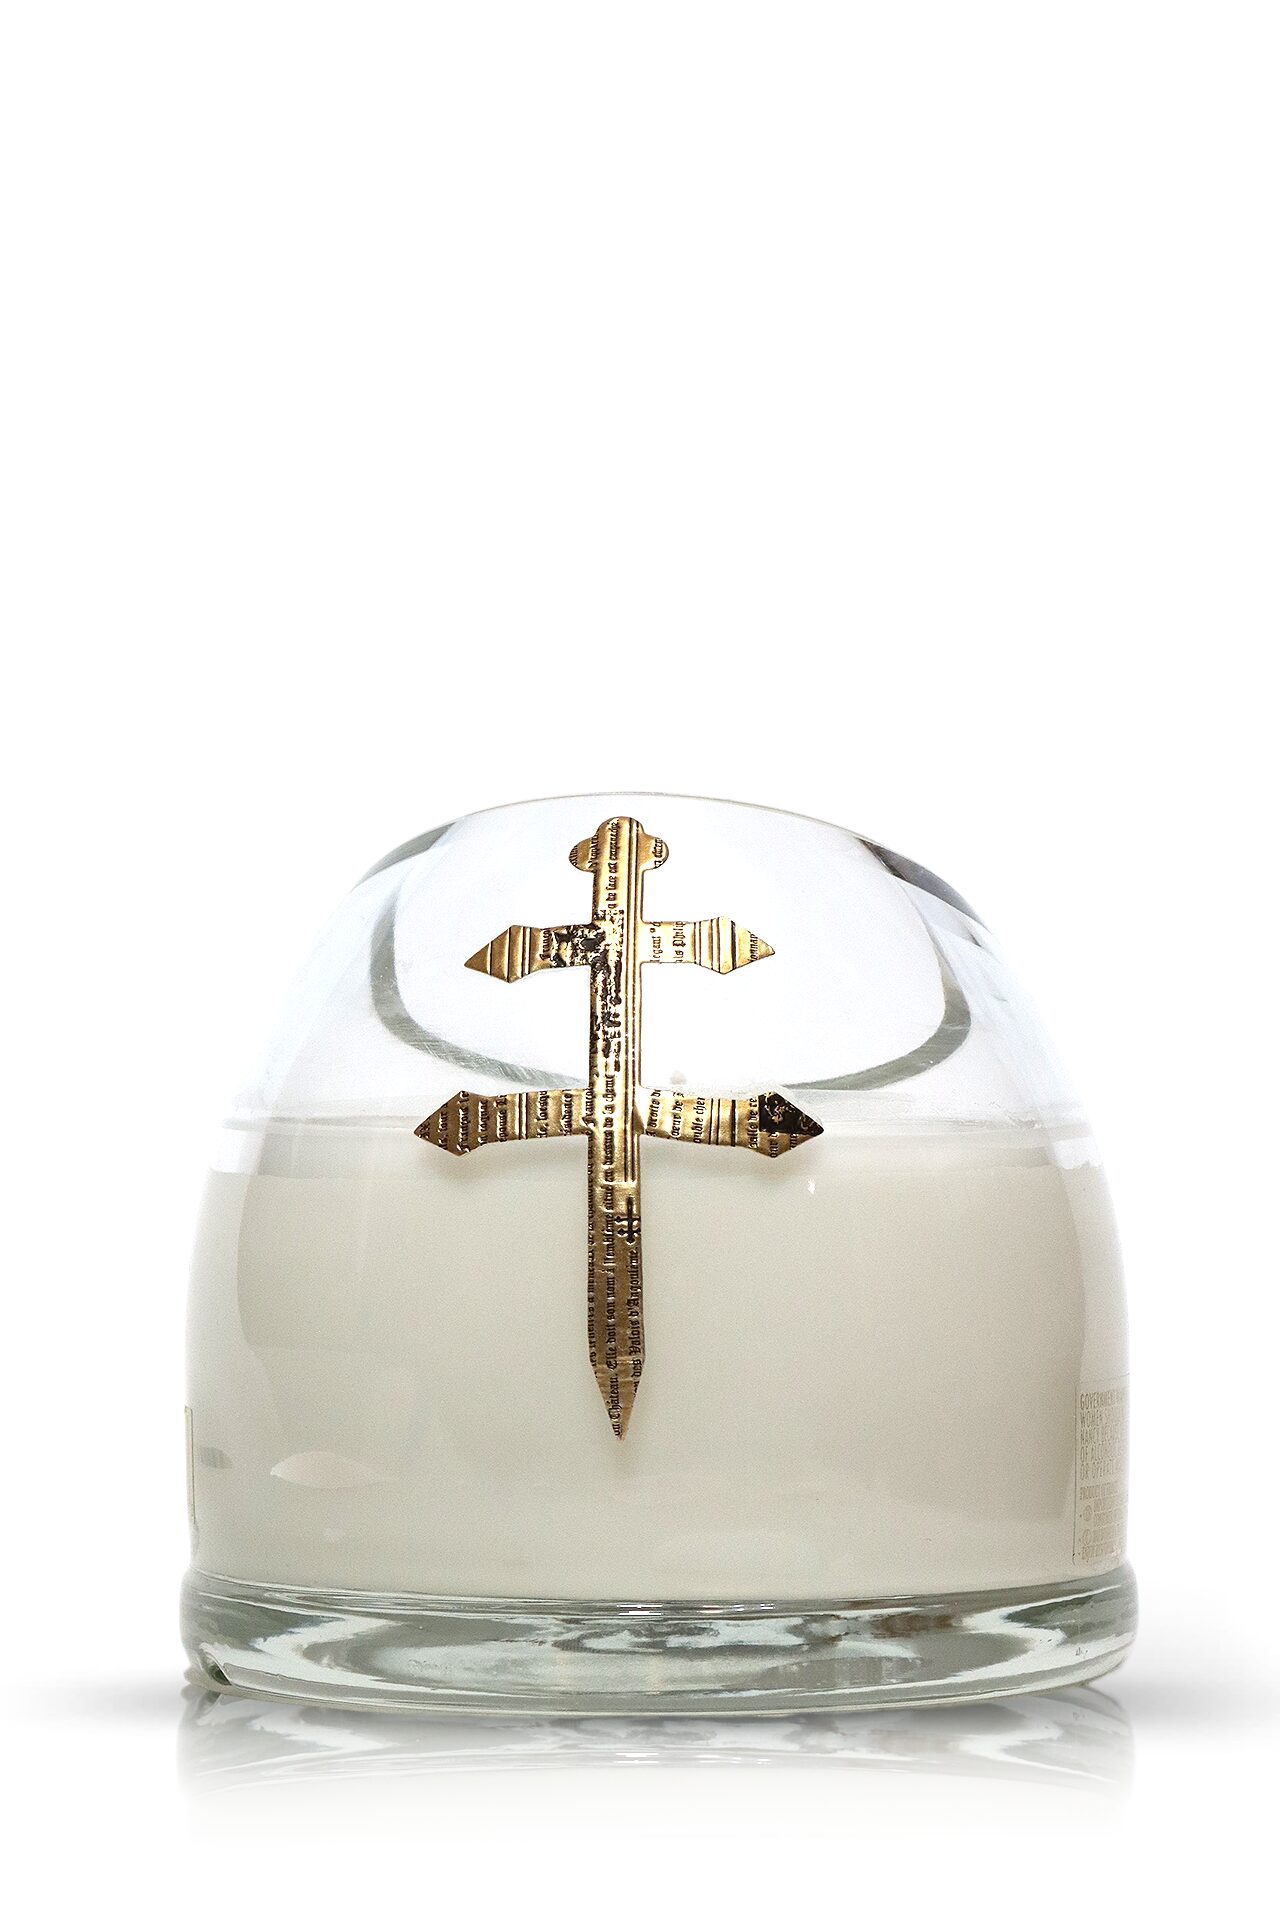 A Recycled D'usse VSOP Cognac Candle with a gold cross on it.